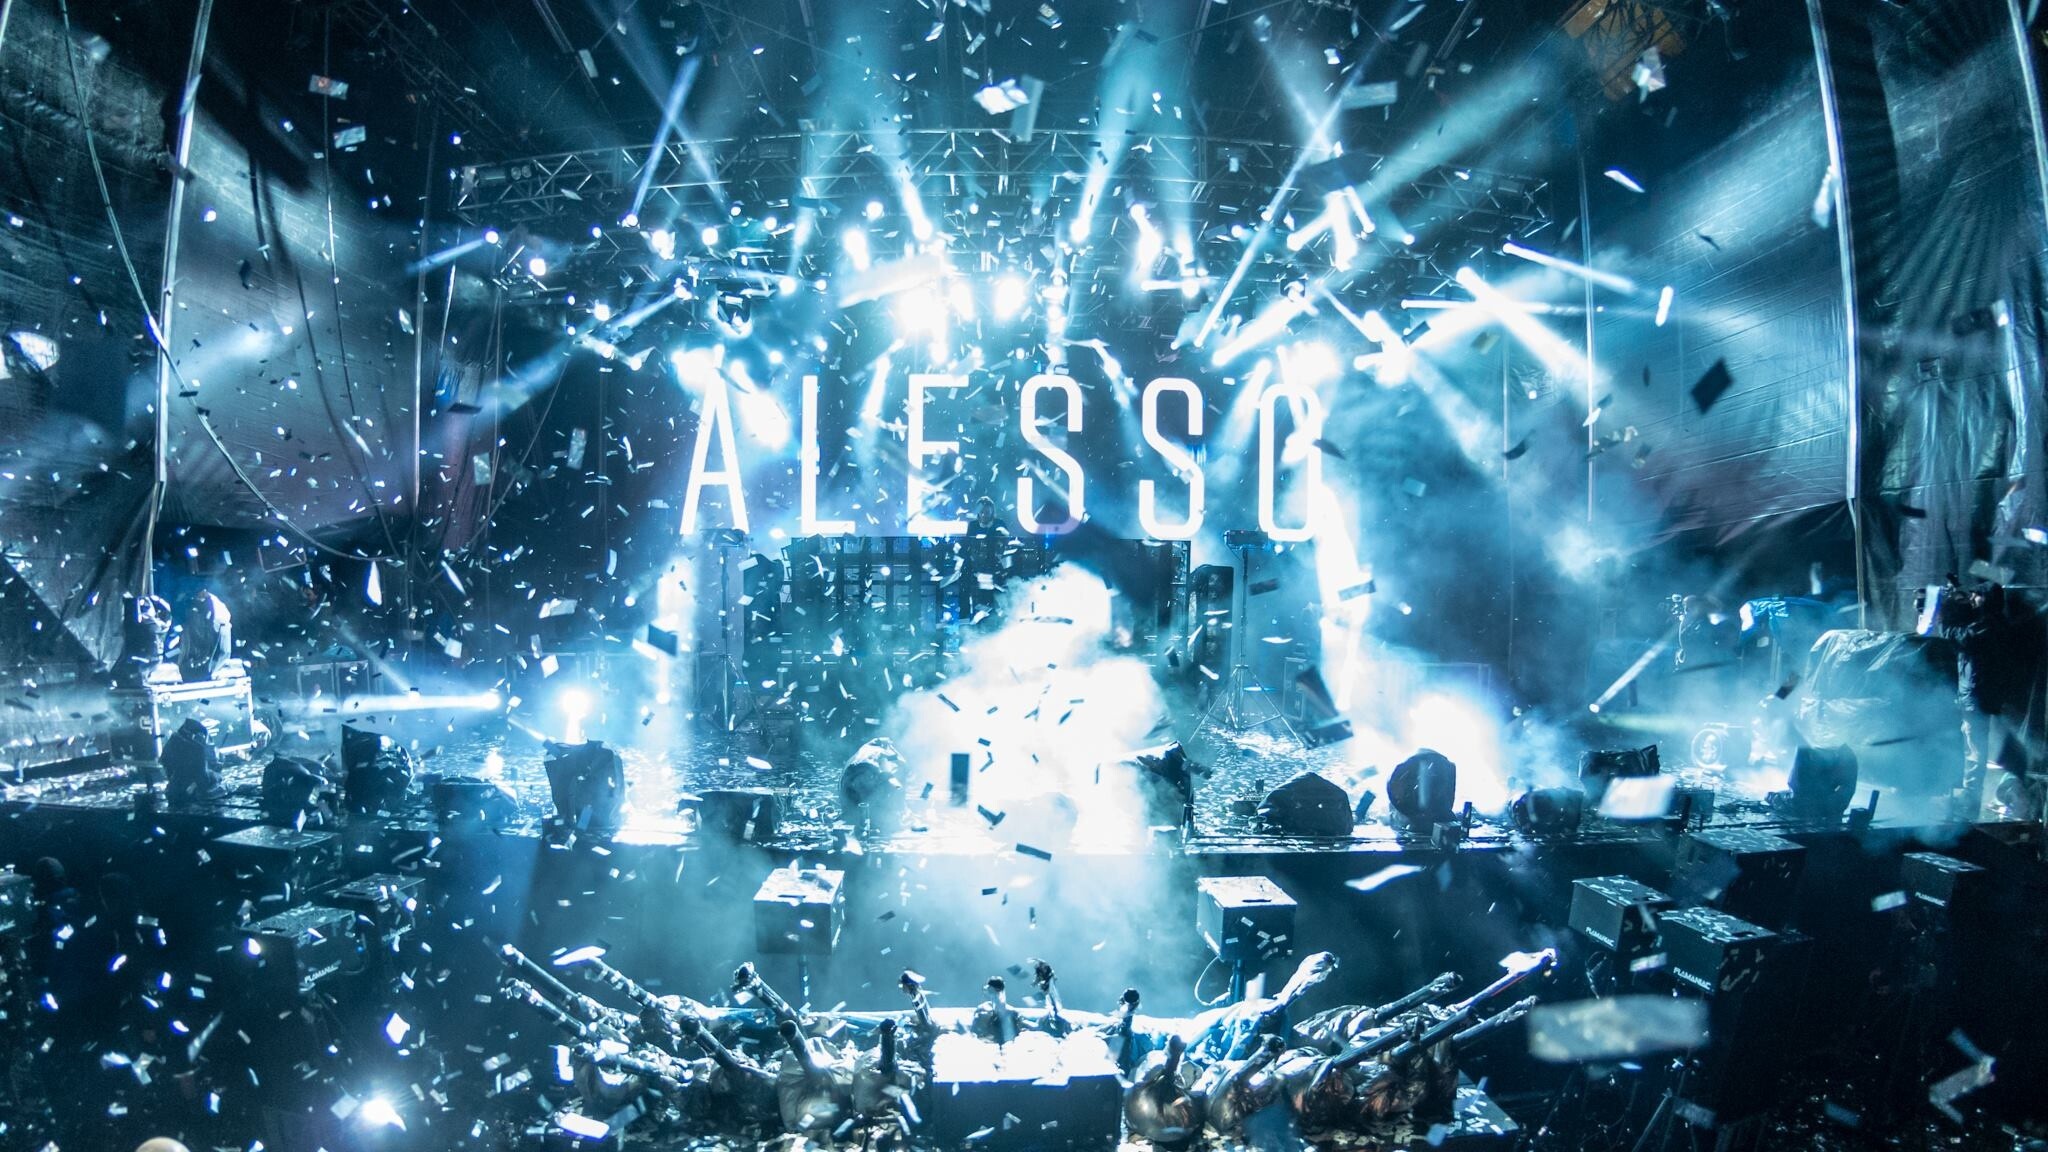 Alesso: "Heroes (We Could Be)" went to number one on the dance chart in the US. 2050x1160 HD Wallpaper.